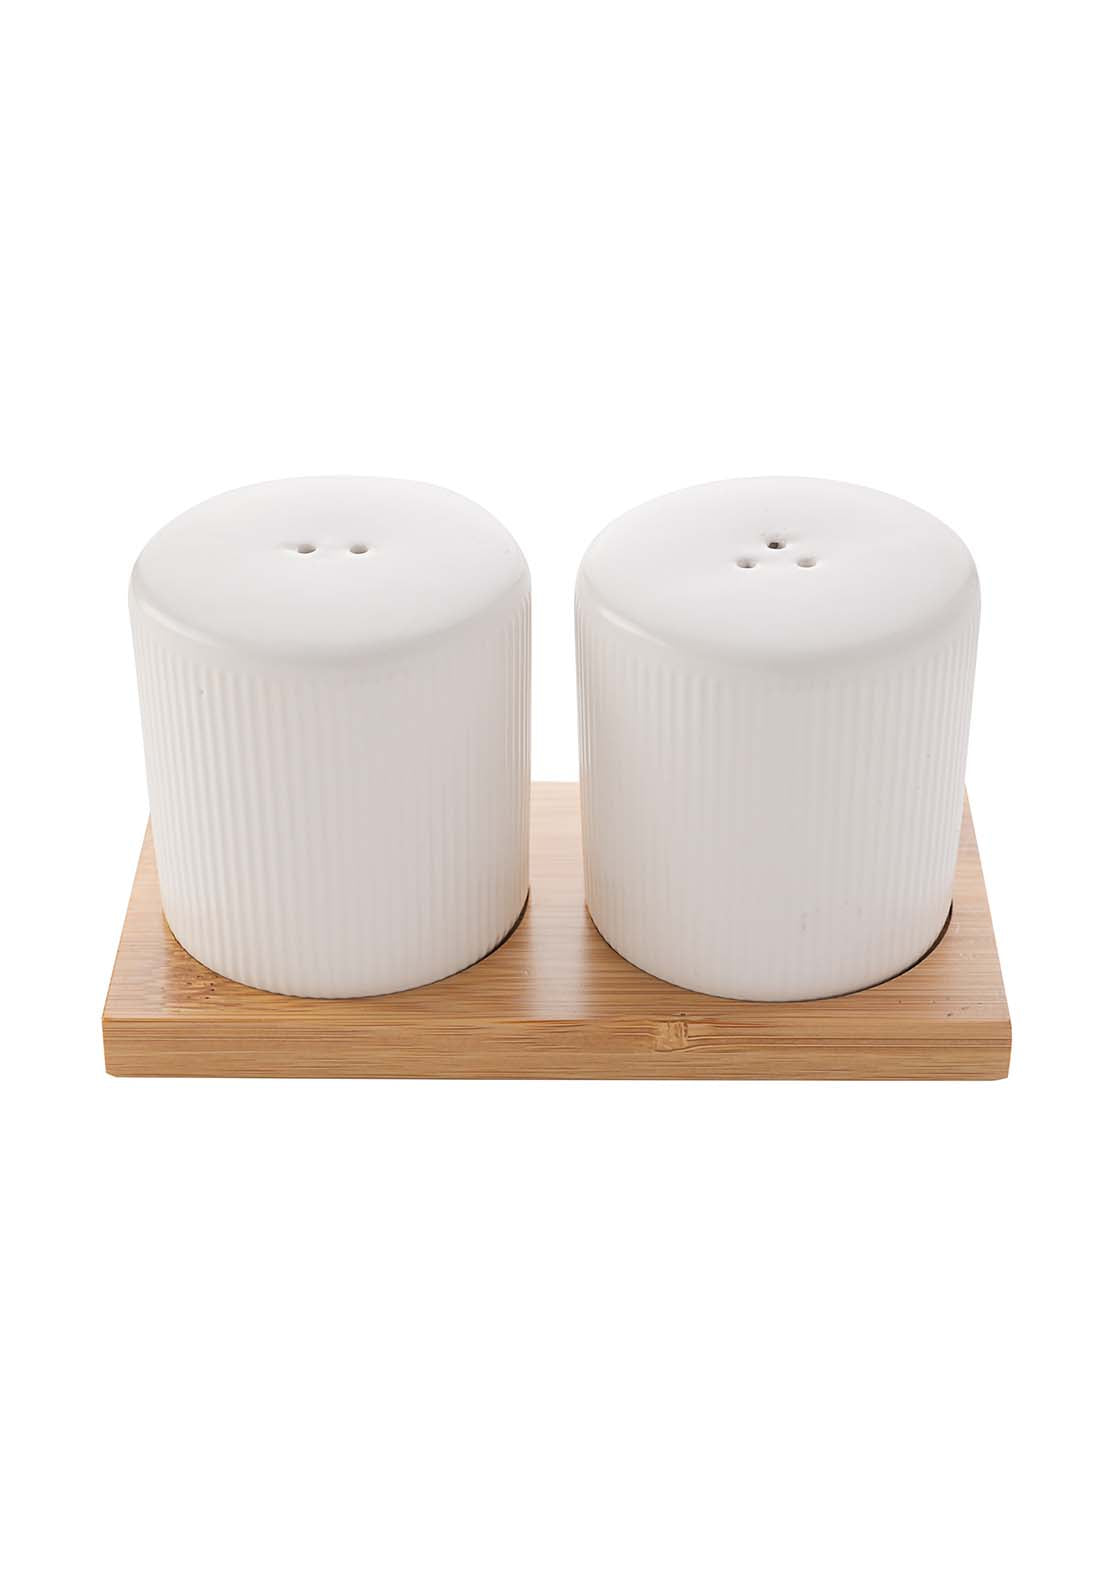 The Home Collection Ribbed Salt Pepper Set - White 1 Shaws Department Stores